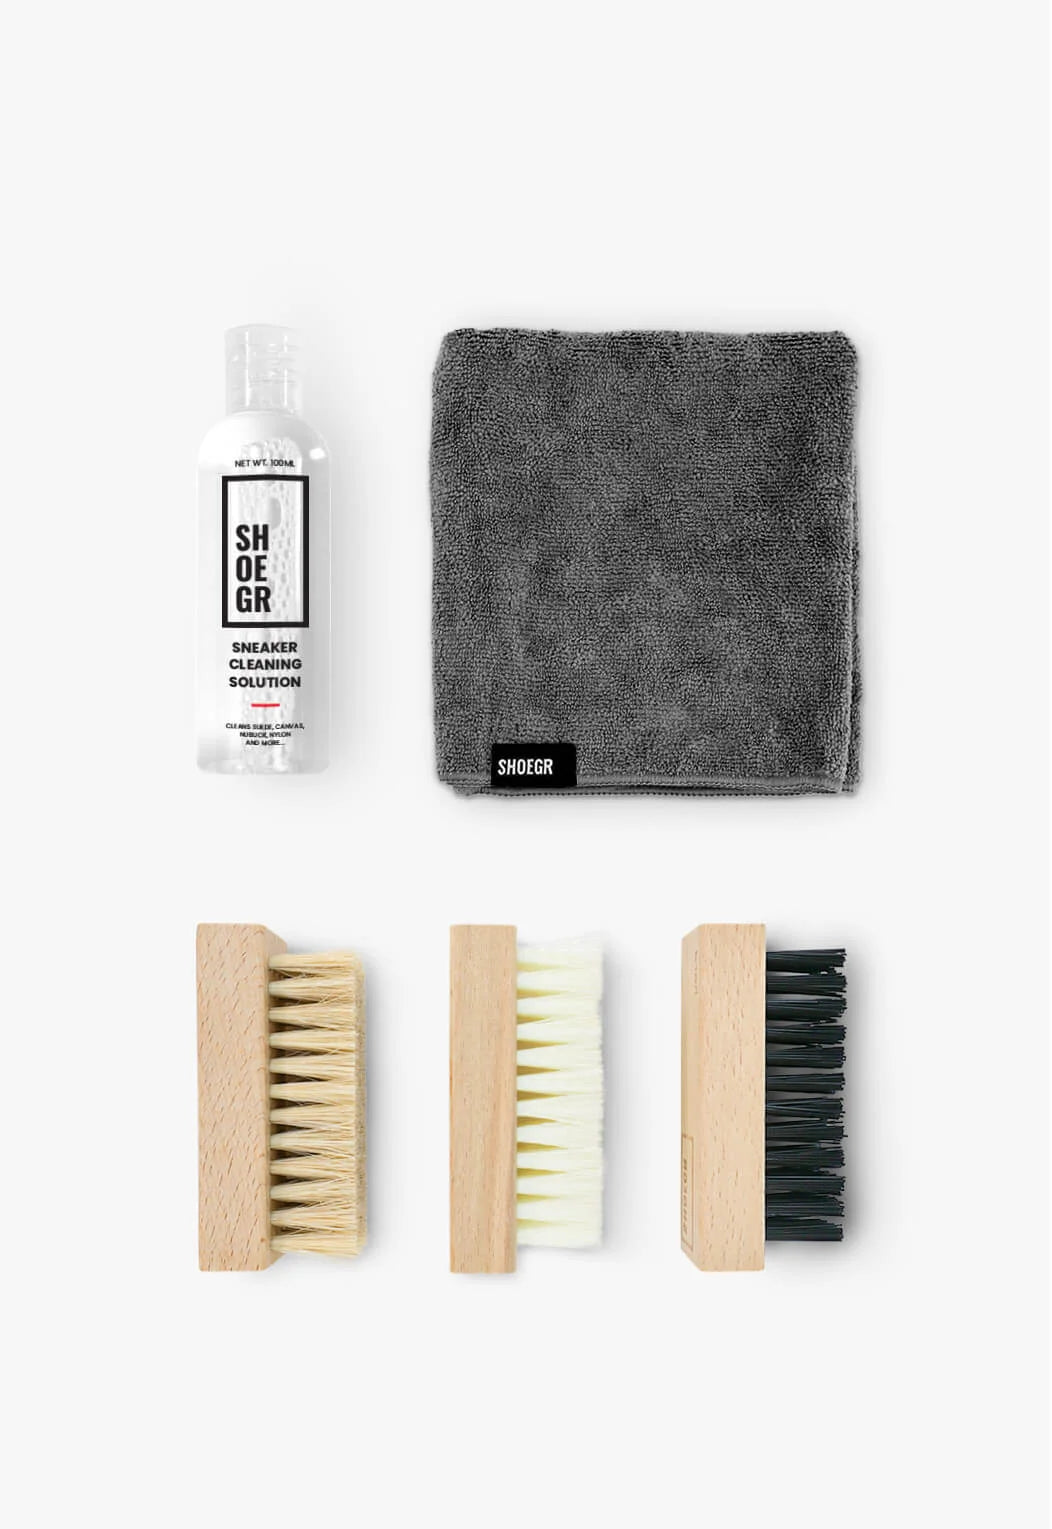 FACTORY LACED Shoe Cleaner Kit | Shoe Cleaner Sneakers Kit Includes: All  Natural 8 Oz. Shoe Cleaner, Brush & Microfiber Towel - Sneaker Cleaner Kit  for: Canvas, Mesh, Suede, Leather, and MORE!